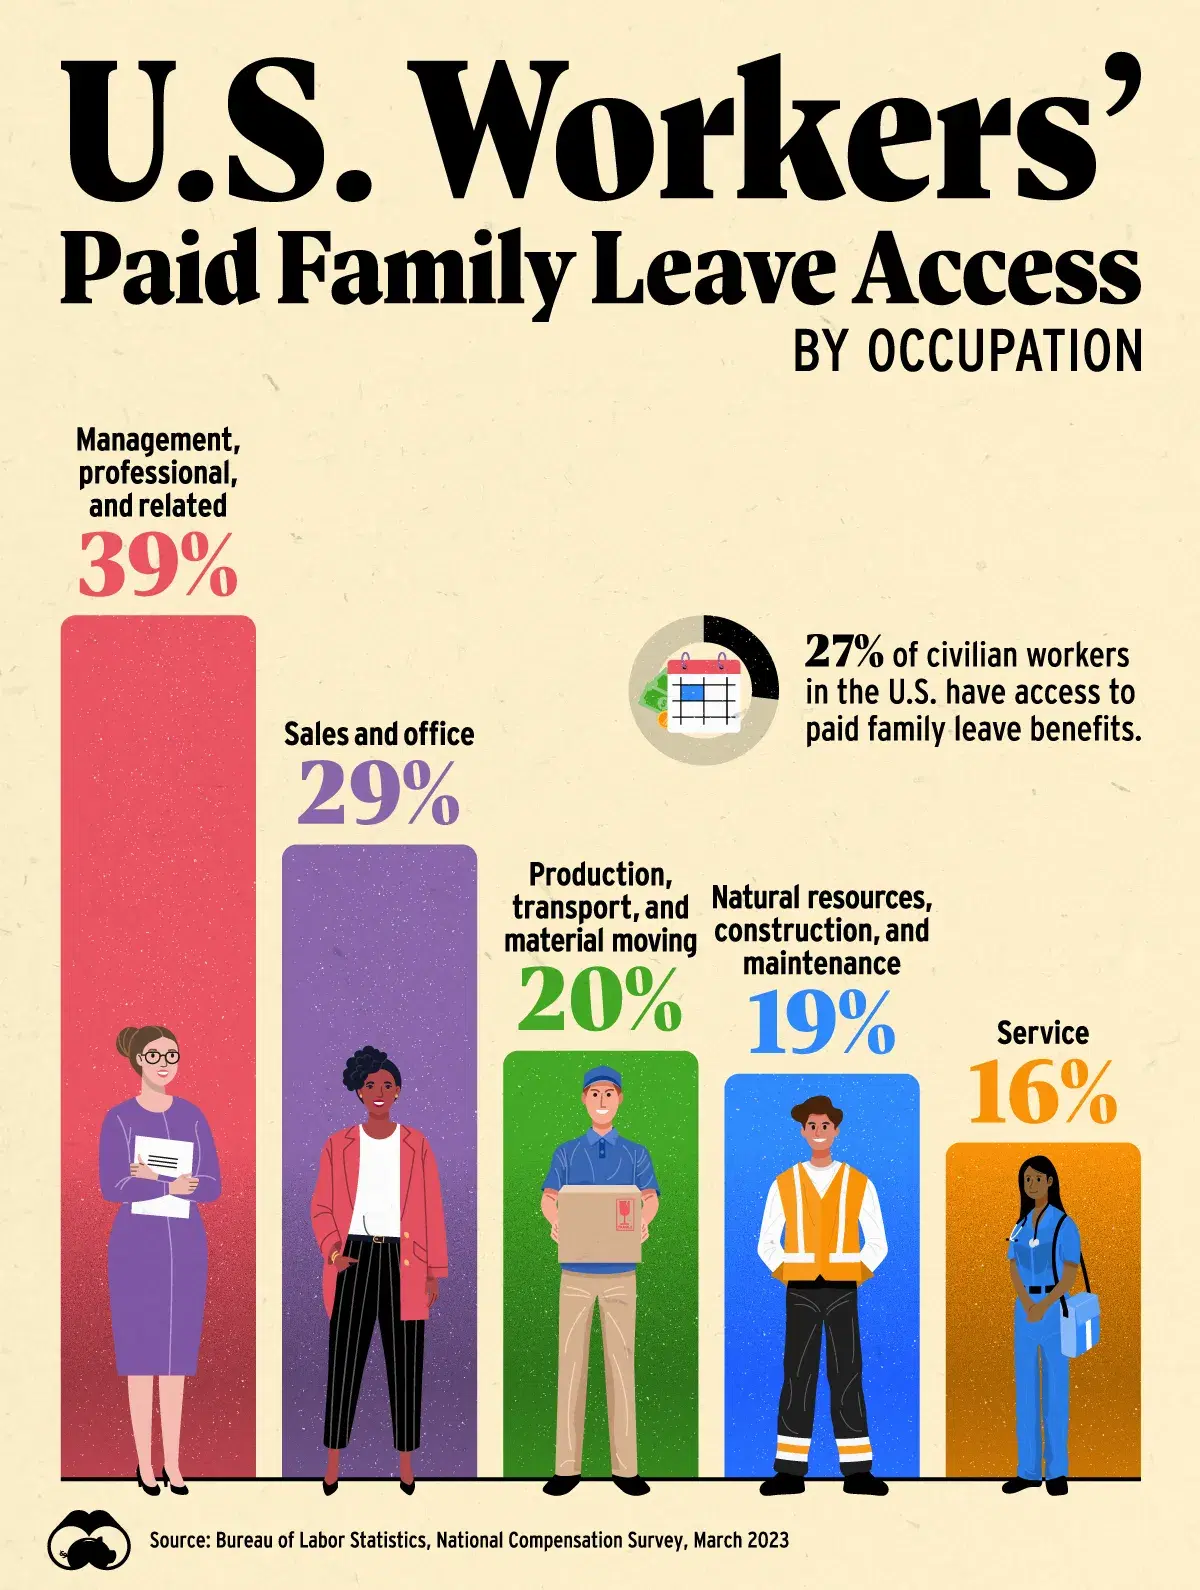 Only 27% of U.S. Workers Have Access to Paid Family Leave Benefits 👨‍👩‍👧‍👦